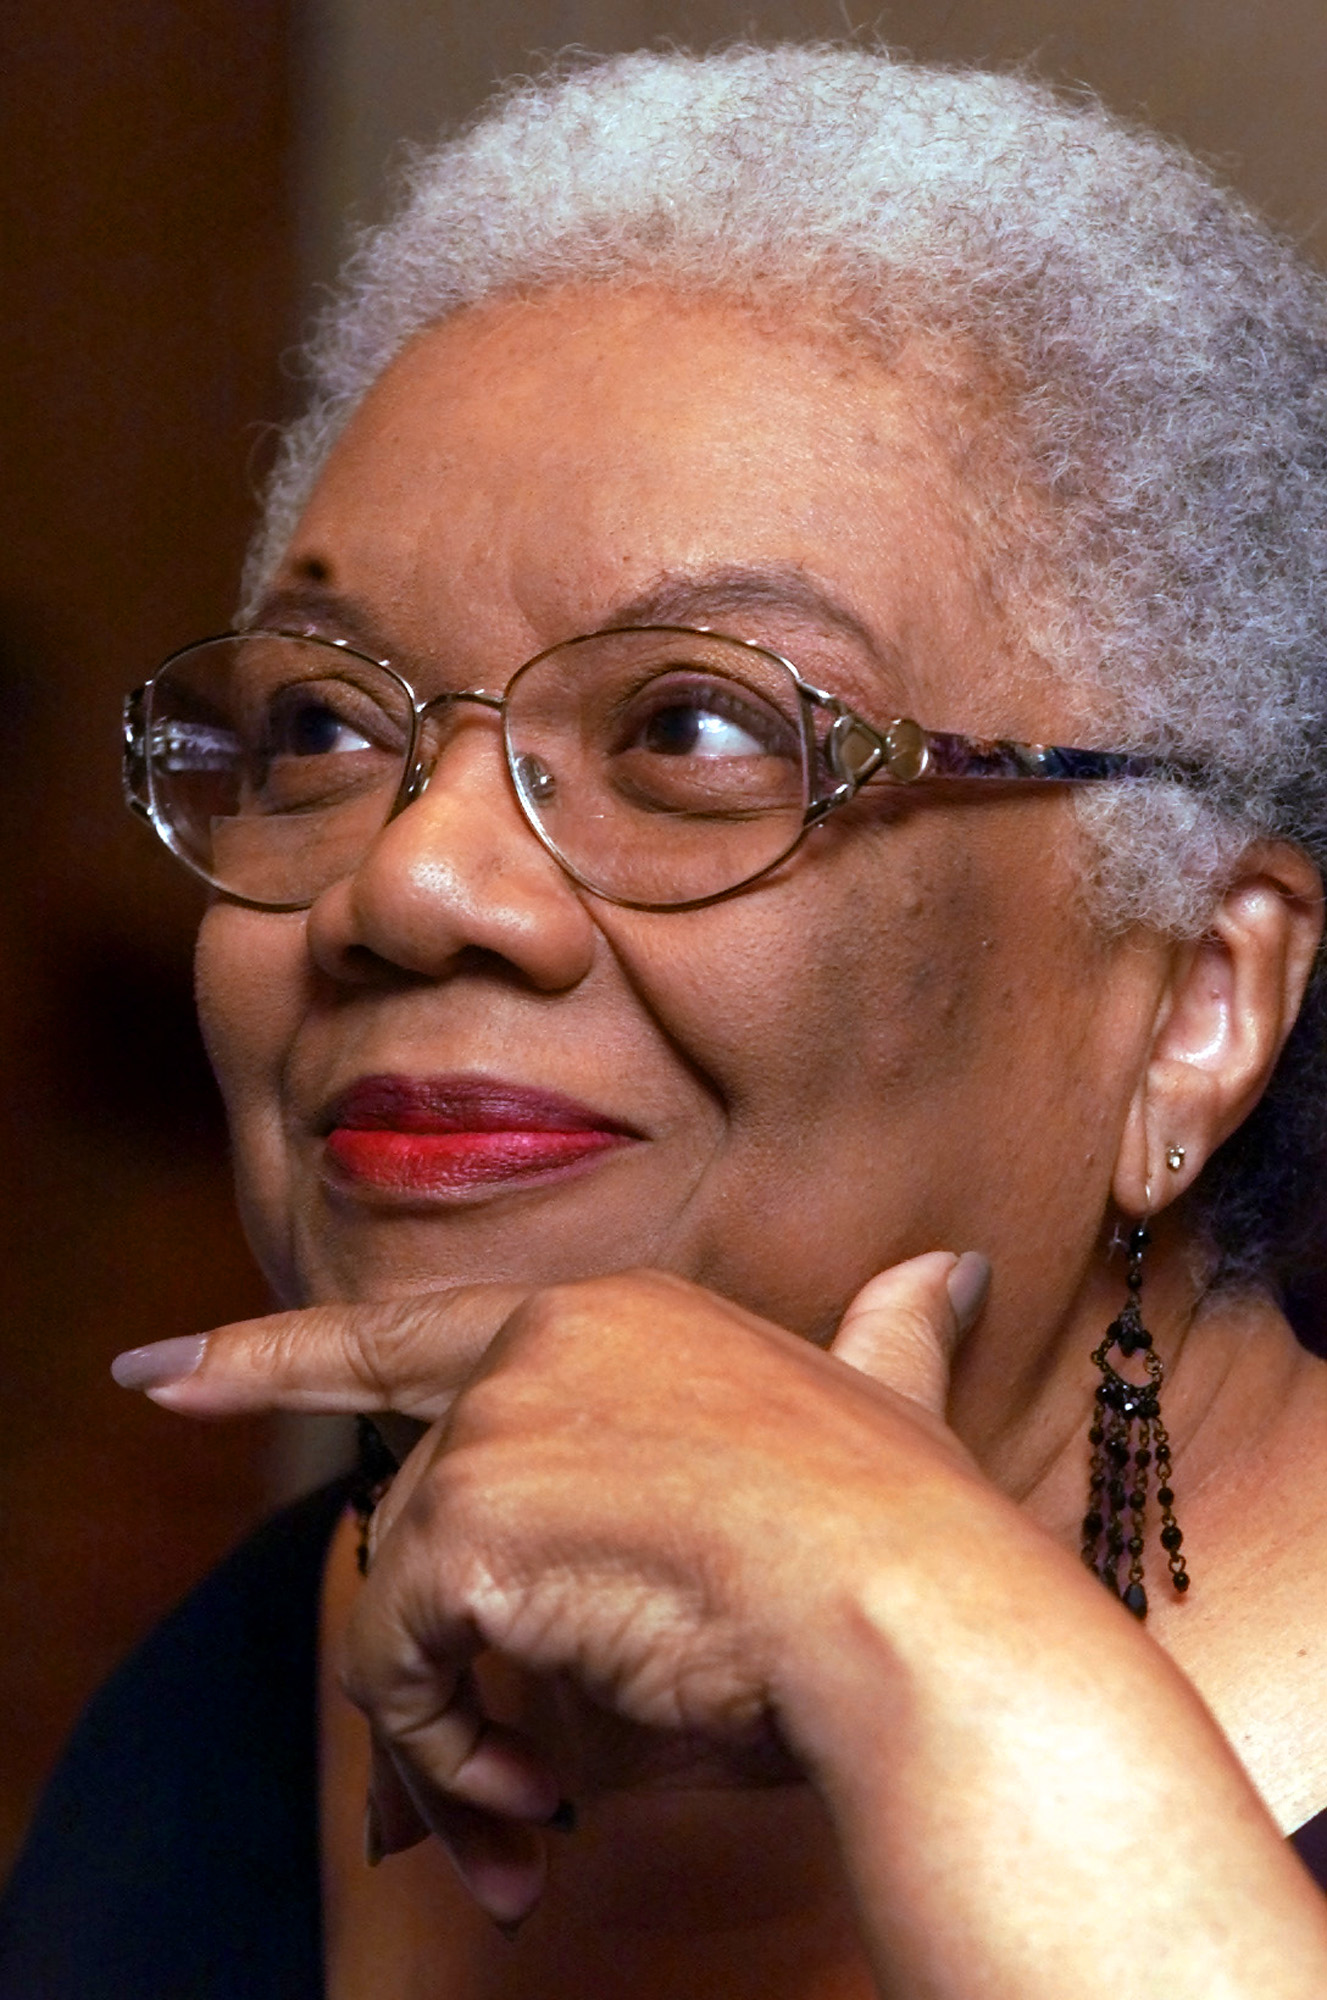 ORG XMIT: NYR115 Lucille Clifton, a 2000 National Book Awards finalist for her poetry 'Blessing the Boats: New and Selected Poems 1988-2000,' attends a reception prior to the awards ceremony Wednesday, Nov. 15, 2000, in New York. (AP Photo/Mark Lennihan)